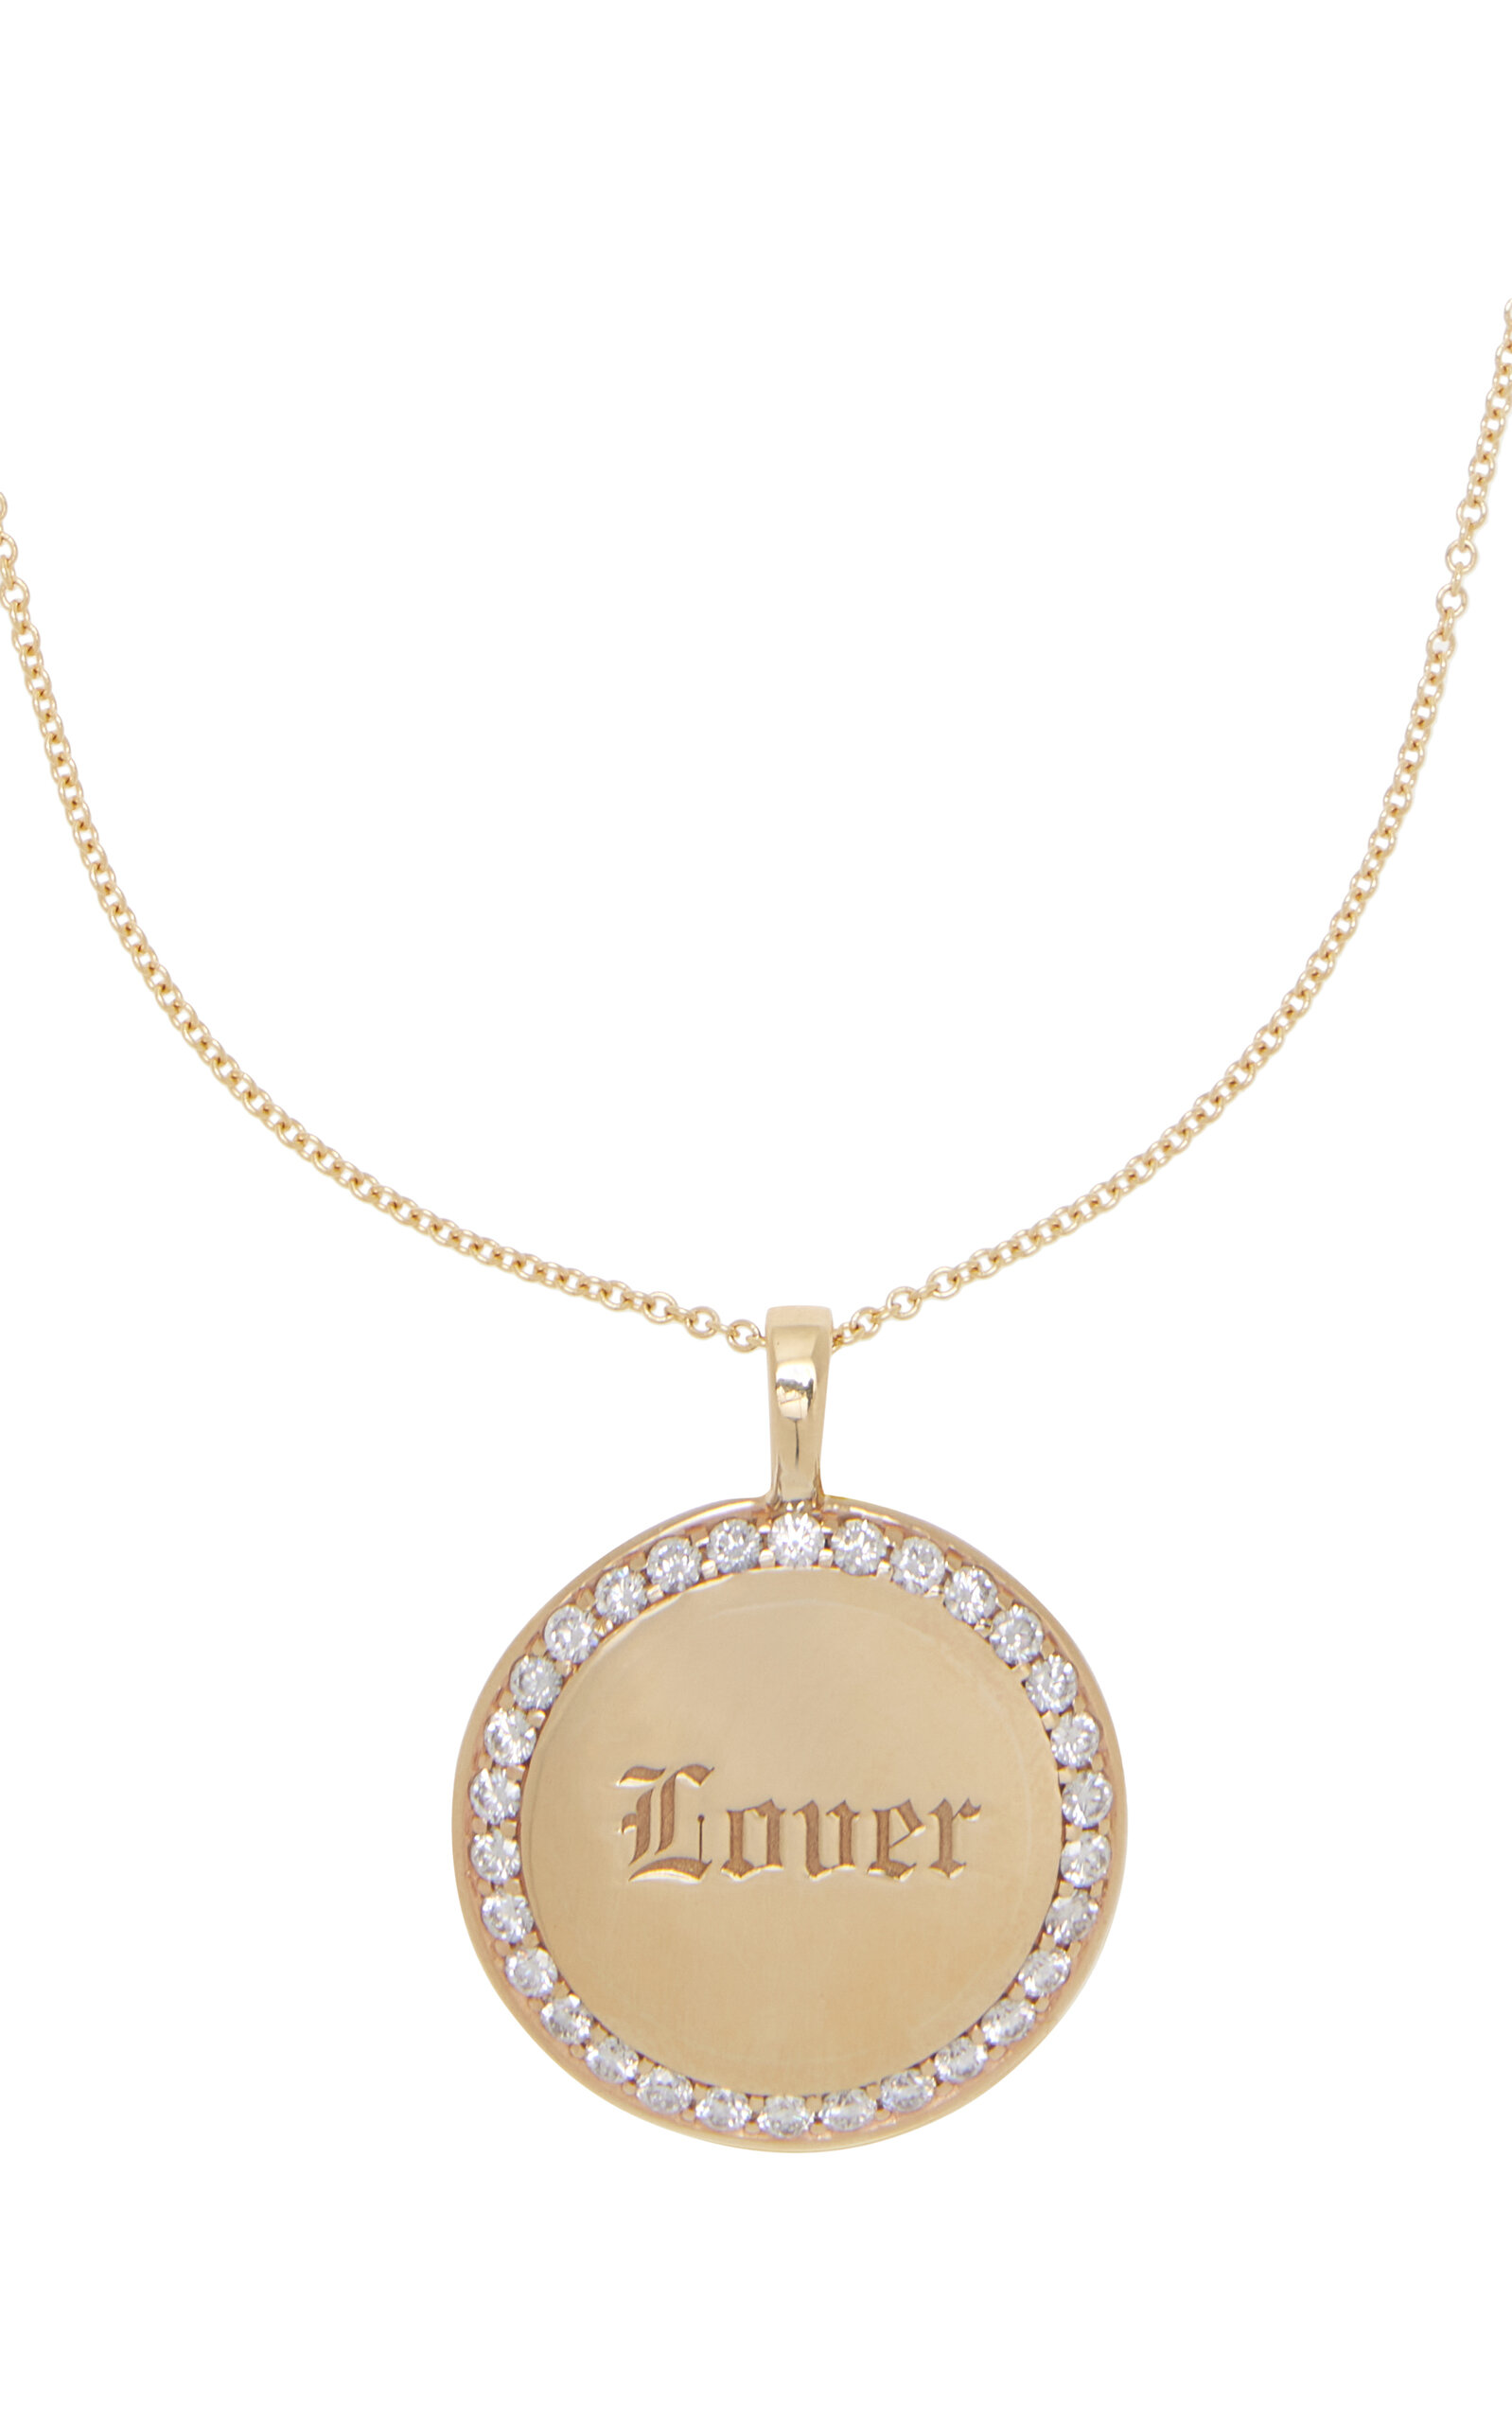 Lover/Fighter 14K Yellow Gold Diamond Necklace